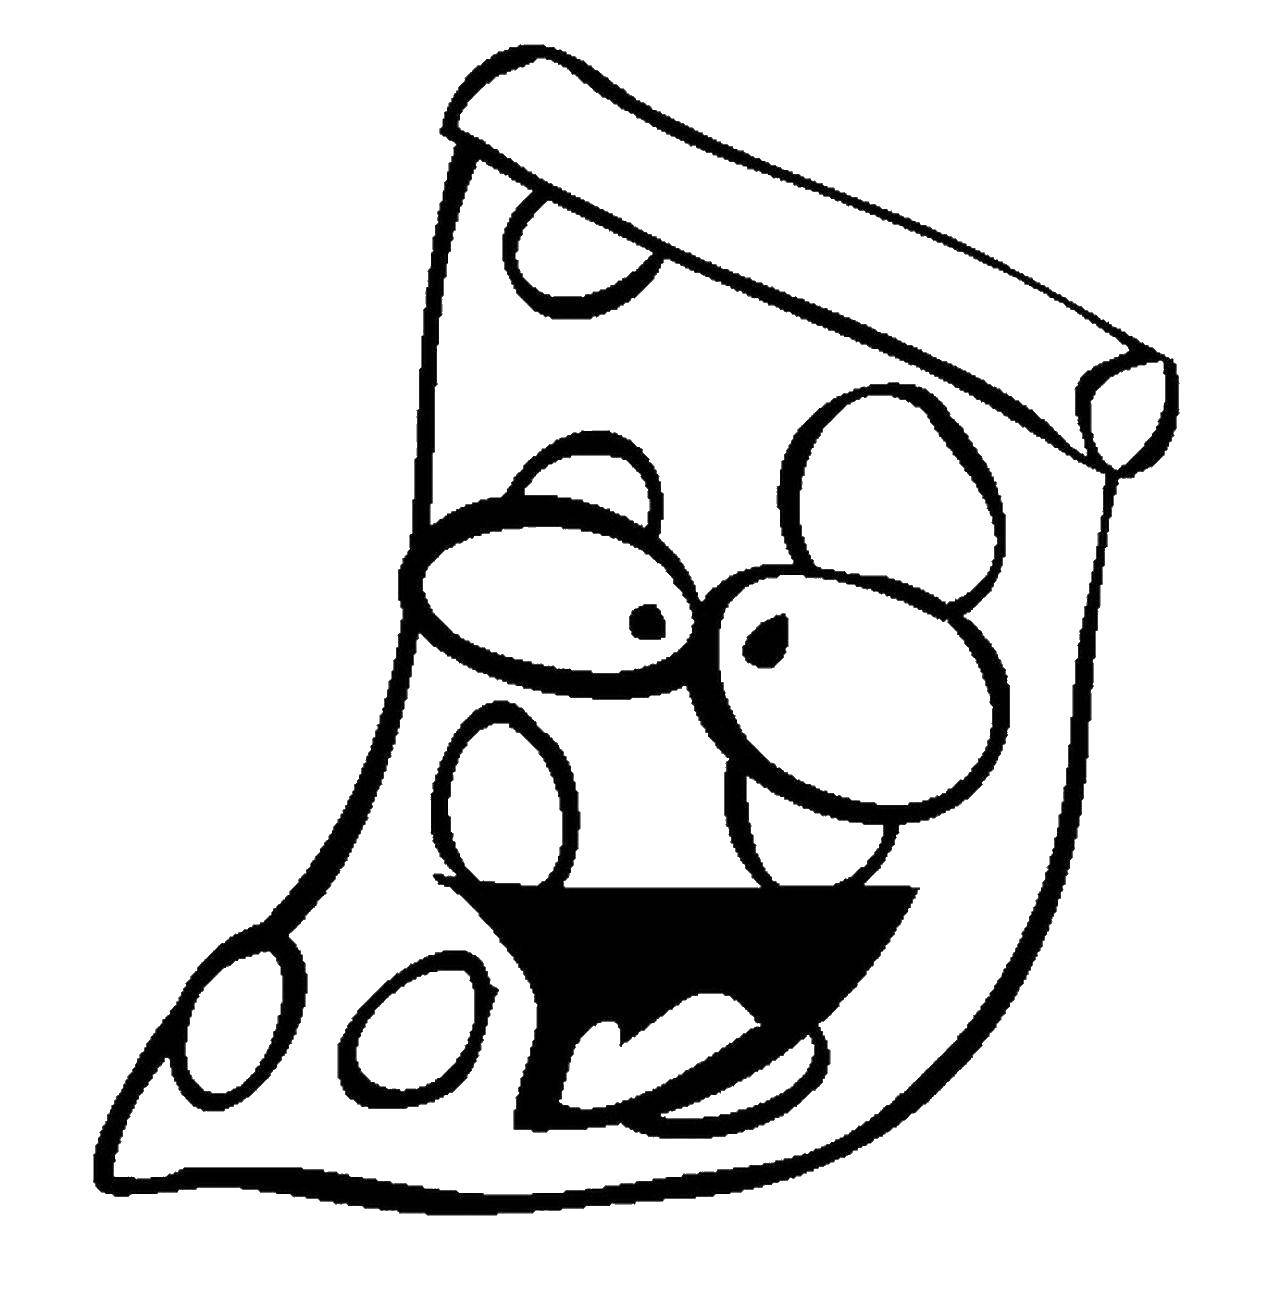 Coloring Pizza. Category The food. Tags:  food, pizza.